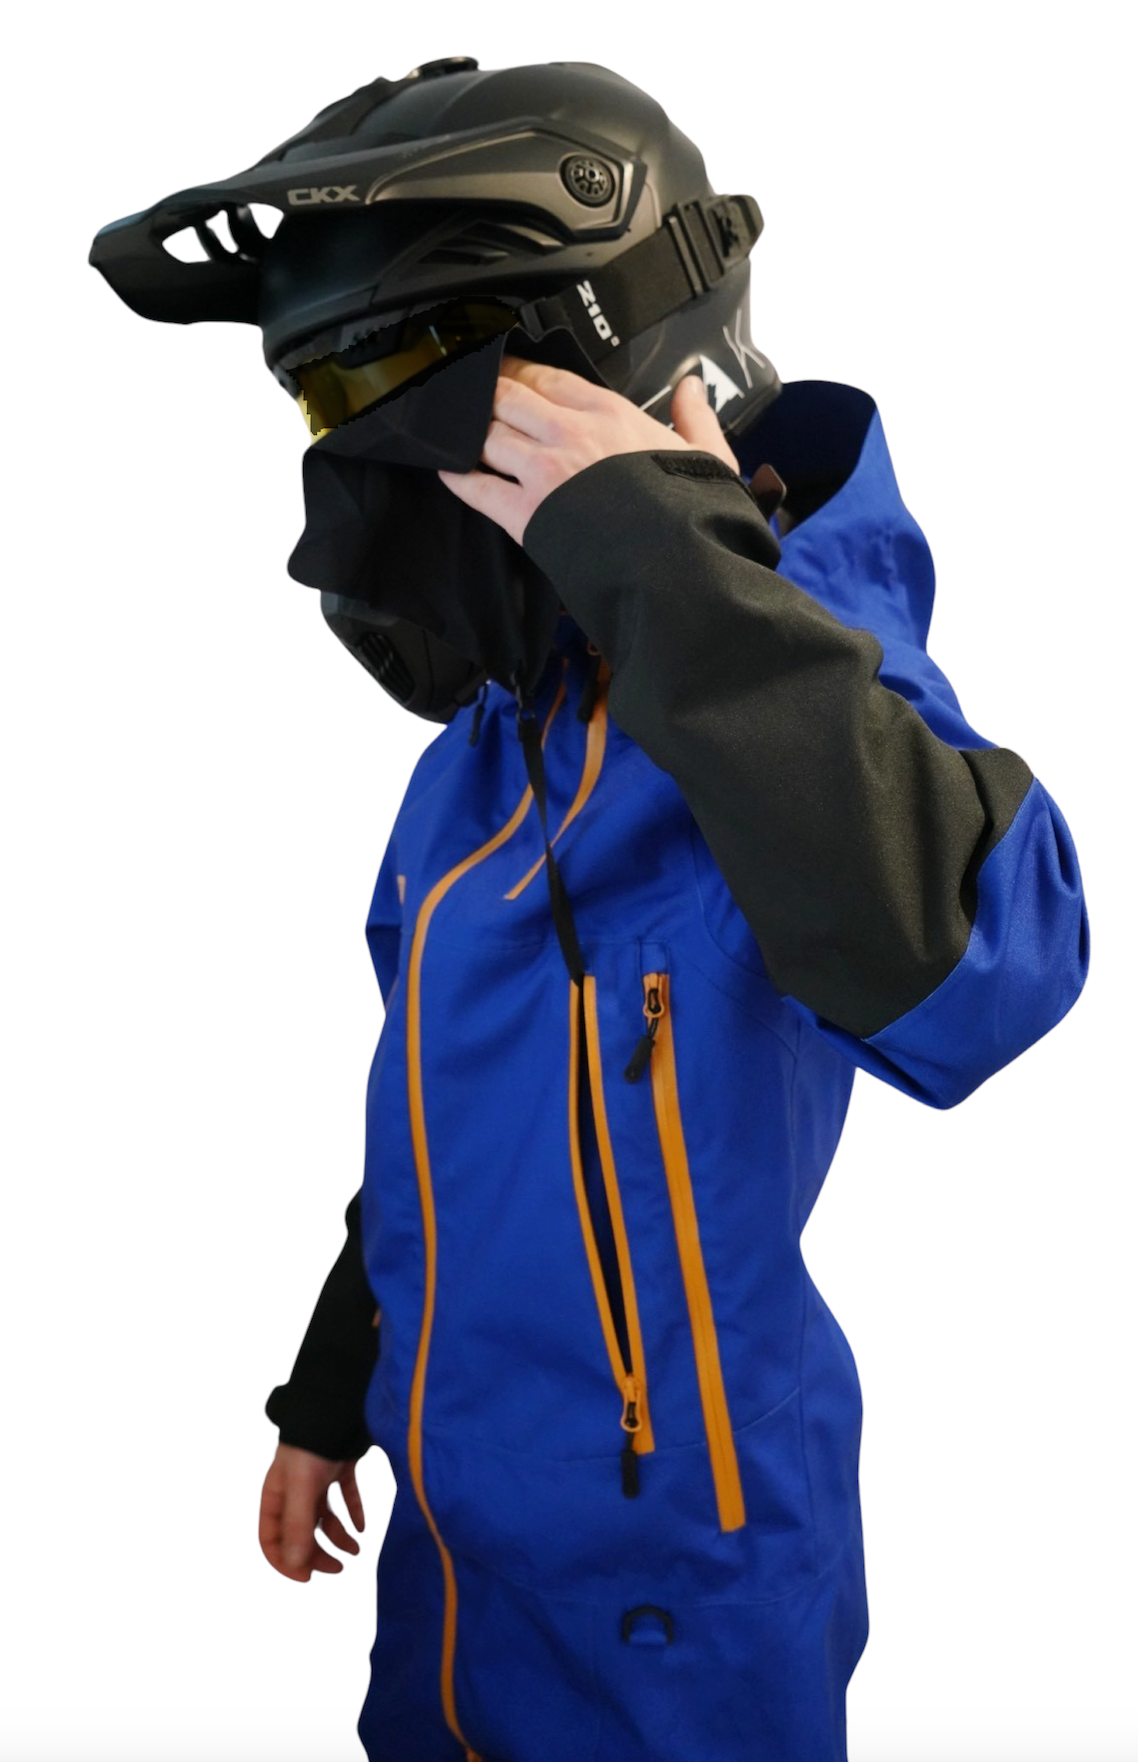 W25 - MONOSUIT NAVY BLUE AND BLACK INSULATED